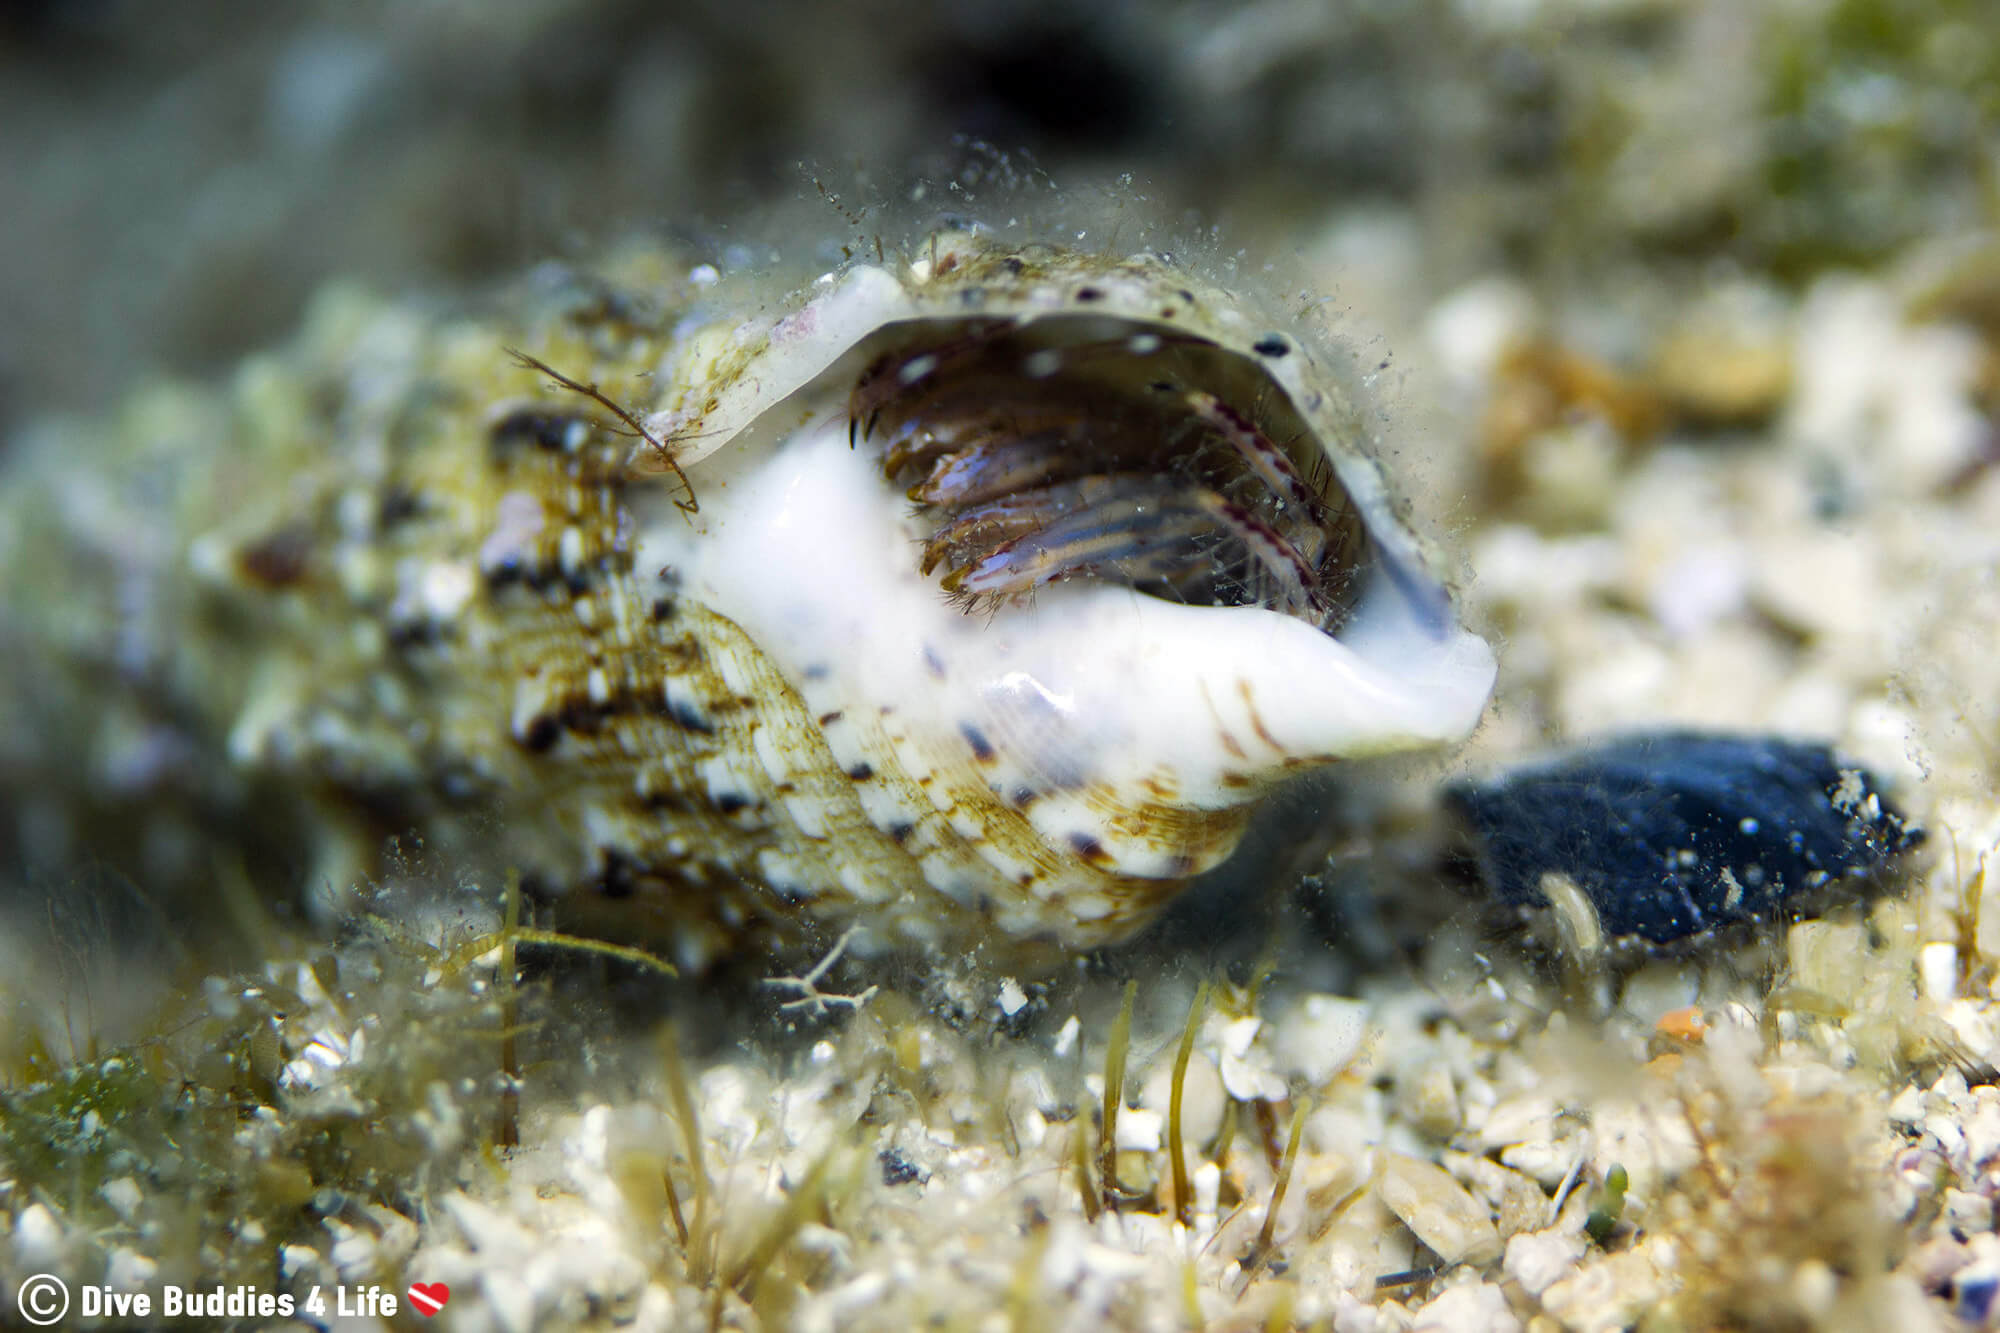 A Hermit Crab Hiding In His Shell In Dubrovnik, Croatia One Of Europe's Balkan Countries